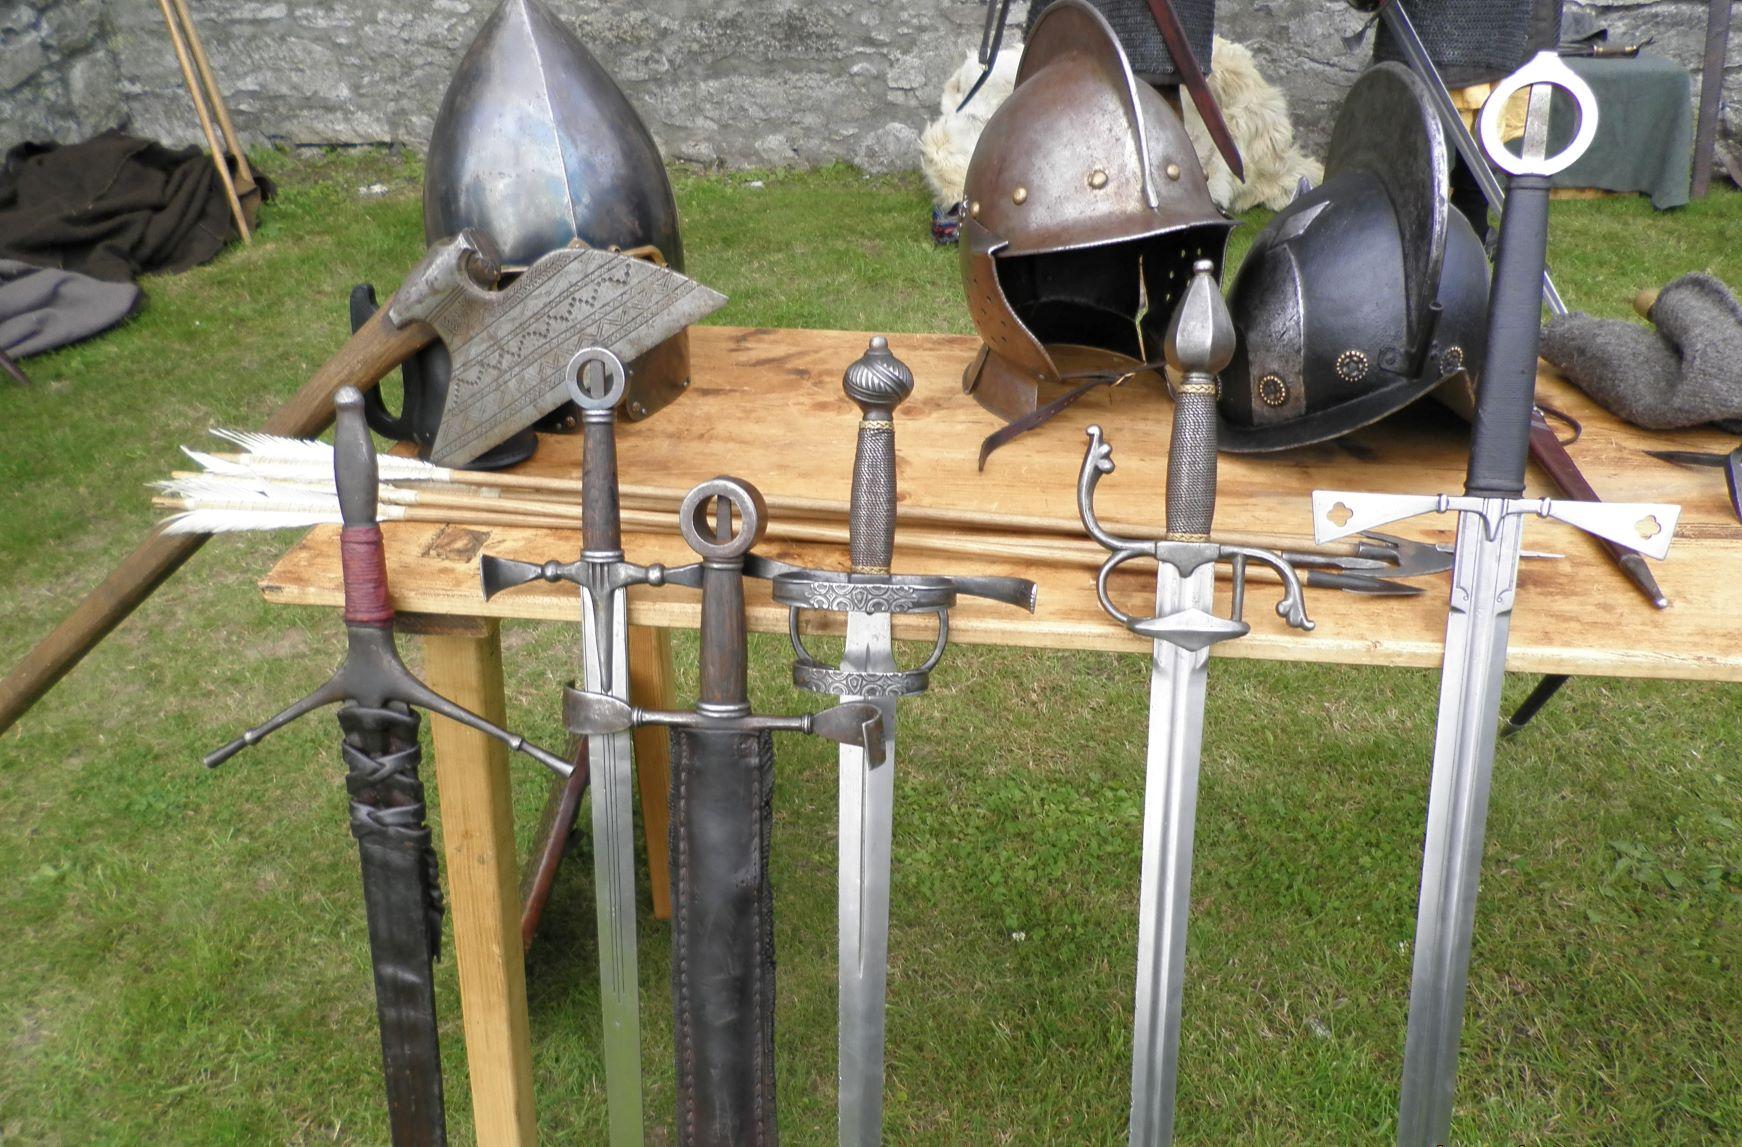 A picture of 5 swords leaning against a table